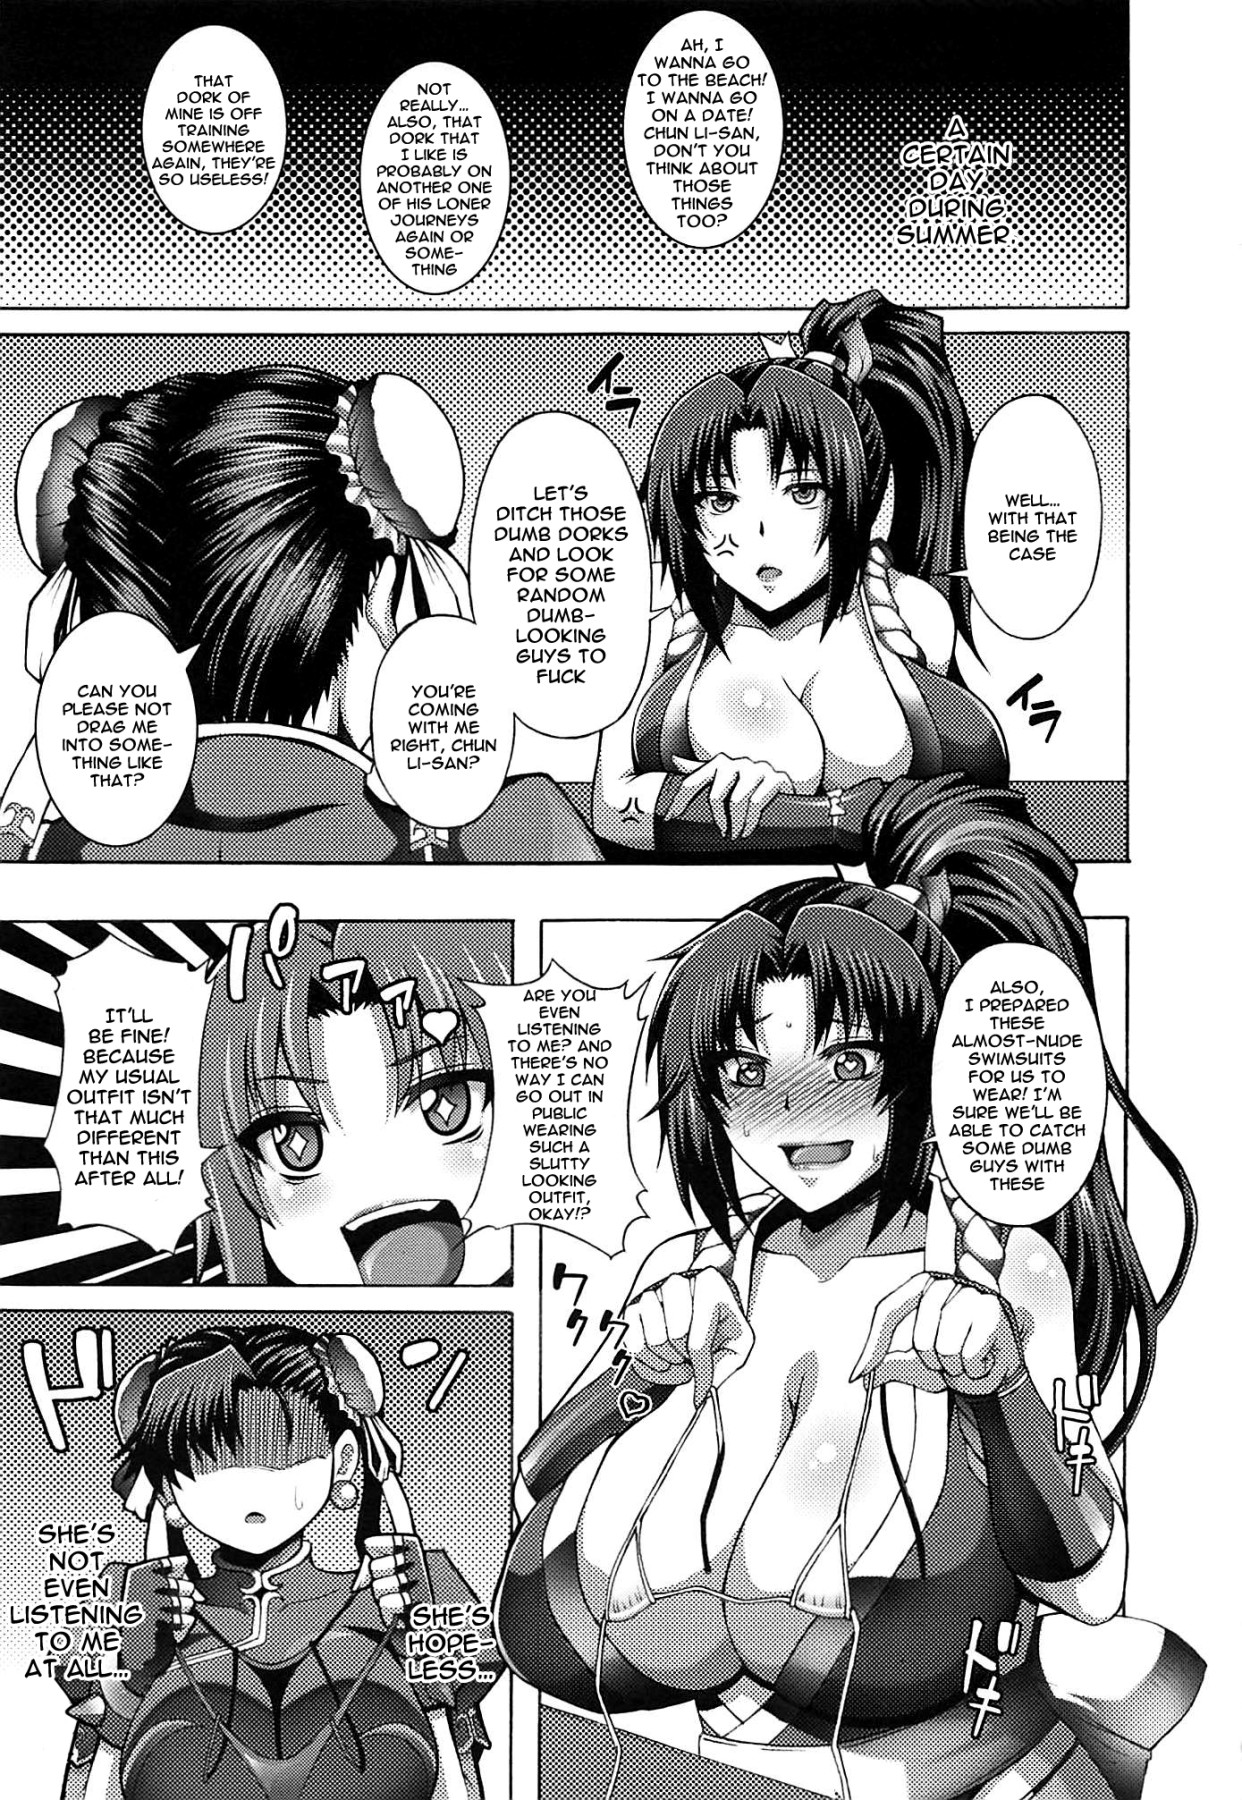 Hentai Manga Comic-A Story About The Lewdest Women In Japan Getting Picked Up And Taken Back To a Hotel-Read-2